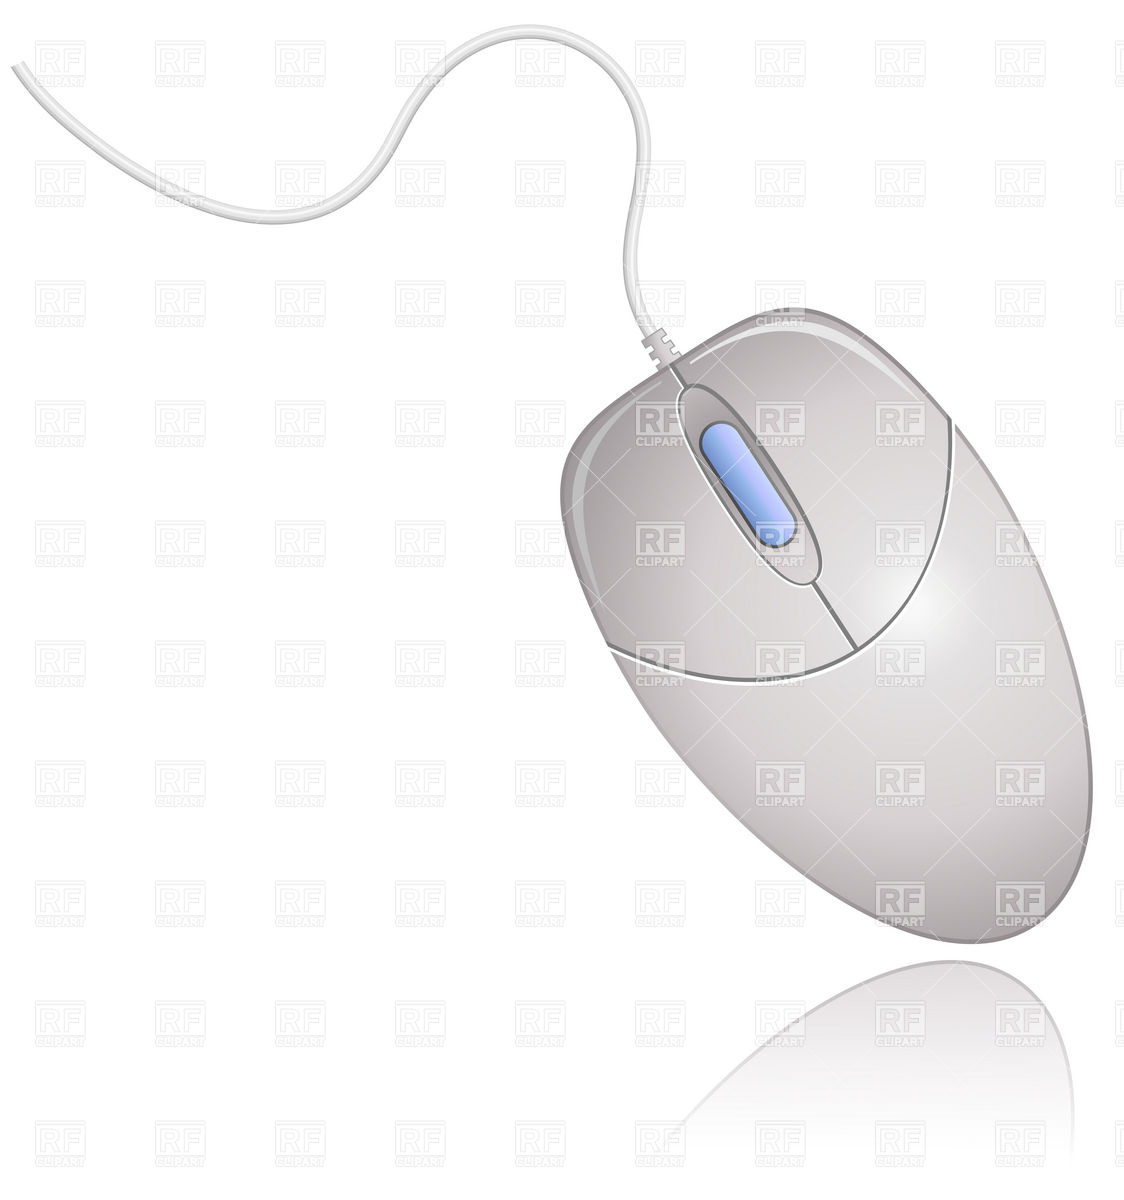 White Computer Mouse Whit Cord Download Royalty Free Vector Clipart